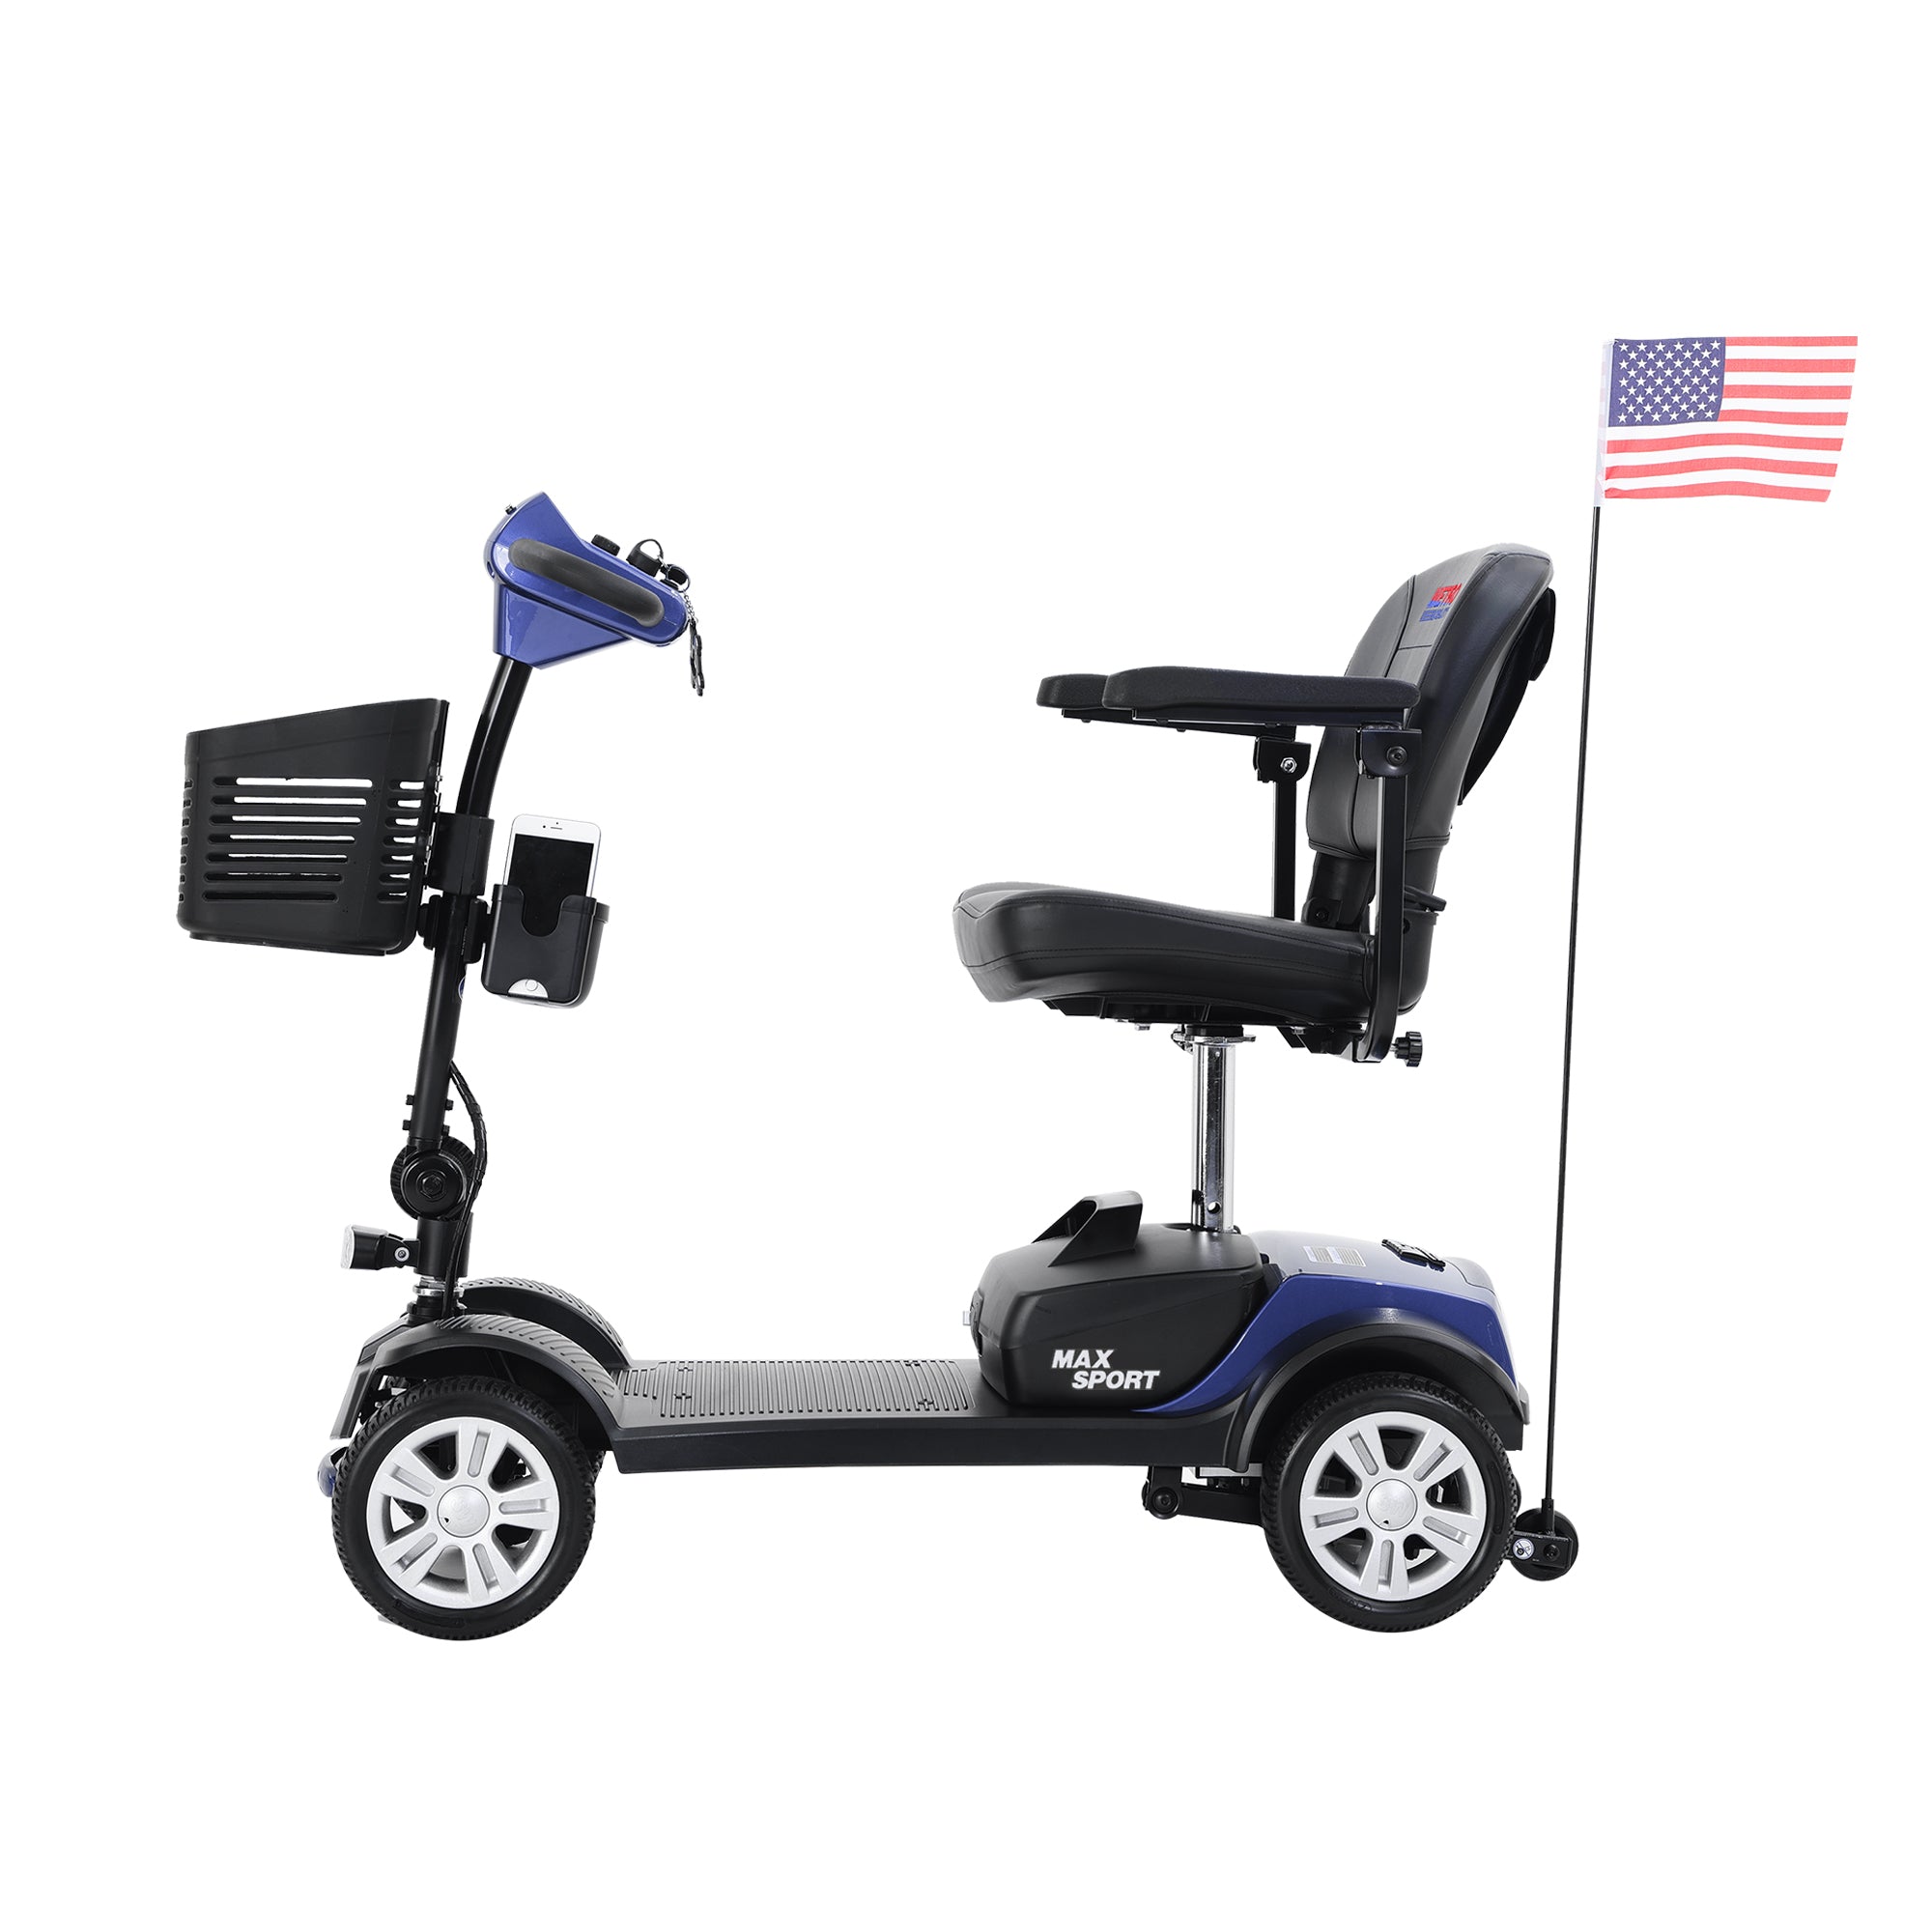 Walmeck SPORT BLUE 4 Wheels Outdoor Compact Mobility Scooter with 2 in 1 Cup & Phone Holder